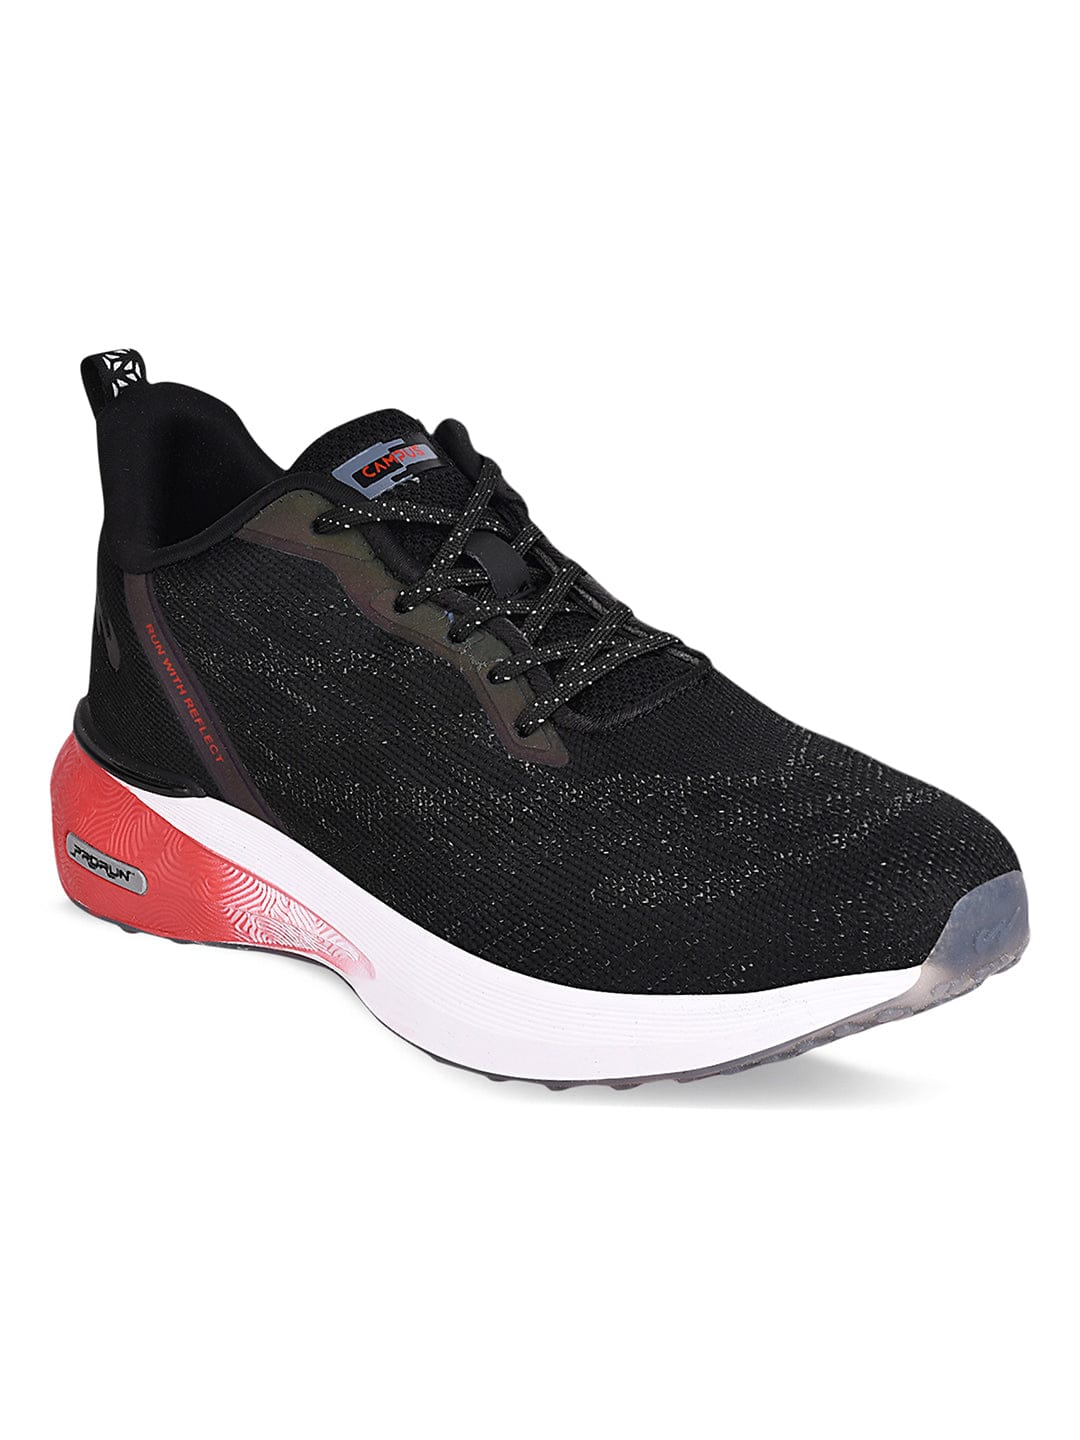 Buy Running Shoes For Kids: Pt-2Blu-S-Grn | Campus Shoes